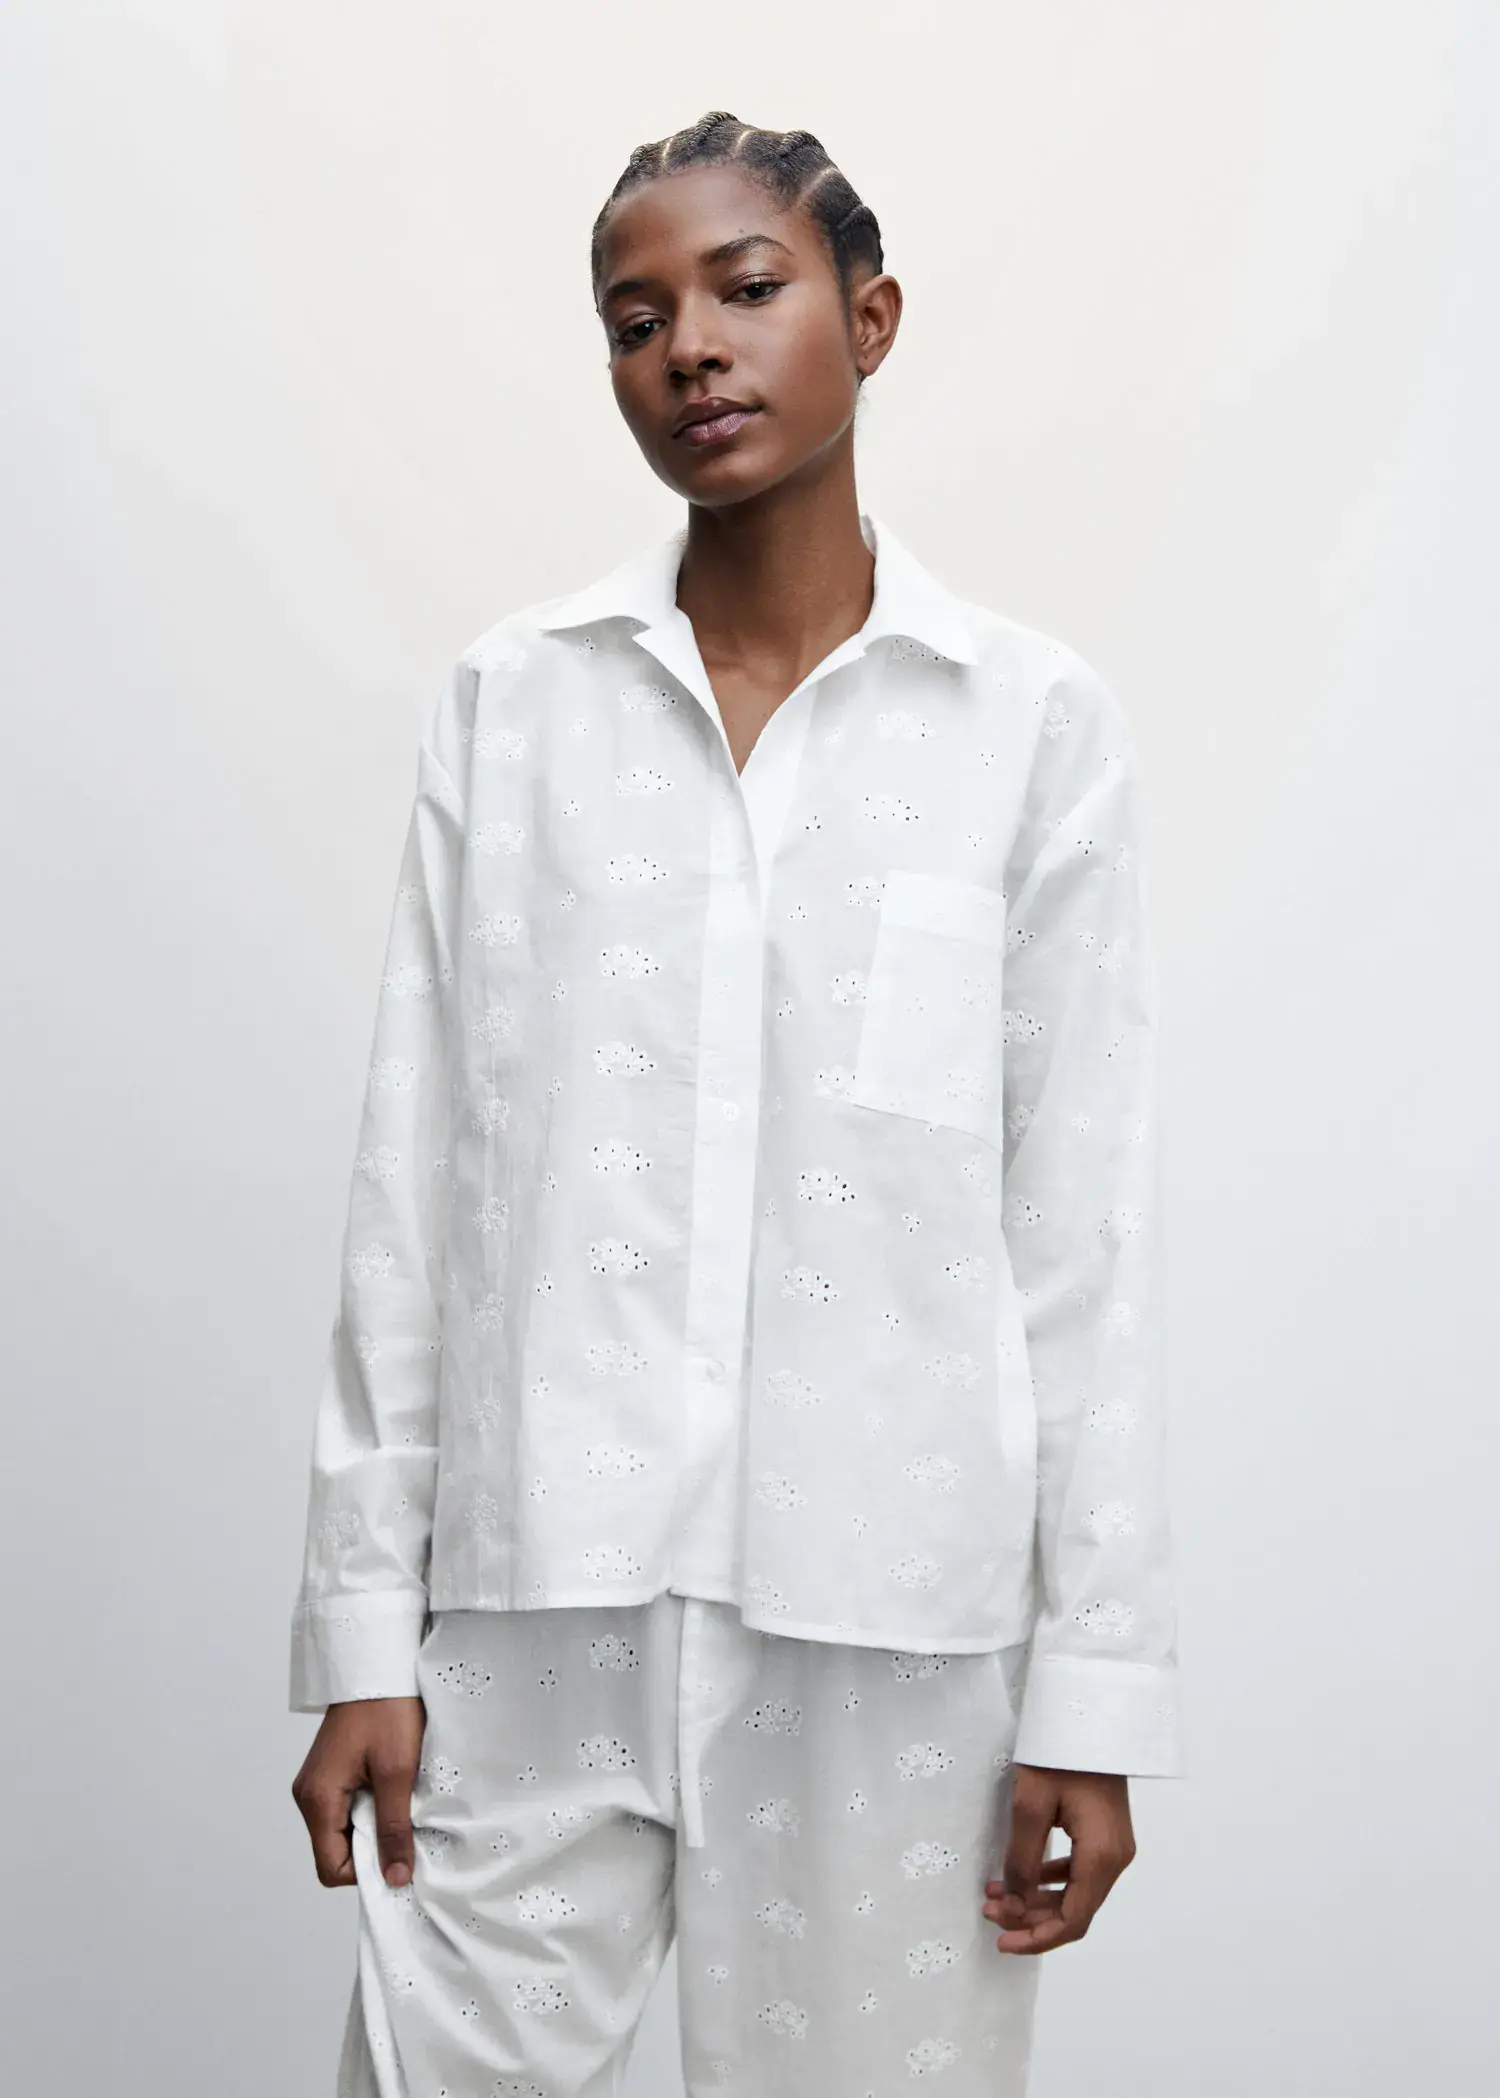 Mango Pyjama shirt with openwork details. a woman wearing a white shirt and white pants. 